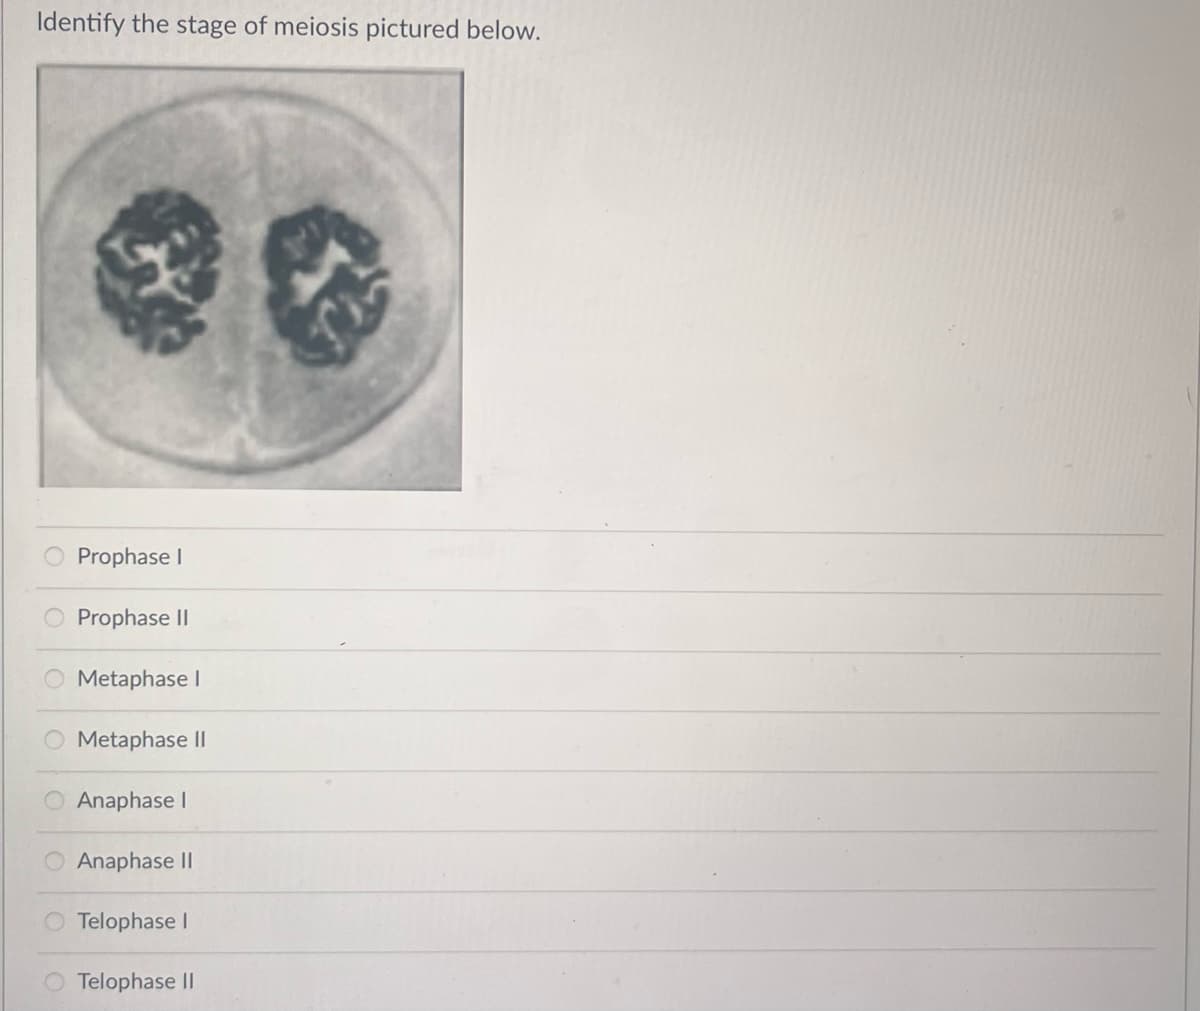 Identify the stage of meiosis pictured below.
Prophase I
Prophase II
Metaphase I
Metaphase II
Anaphase I
Anaphase II
Telophase I
Telophase II